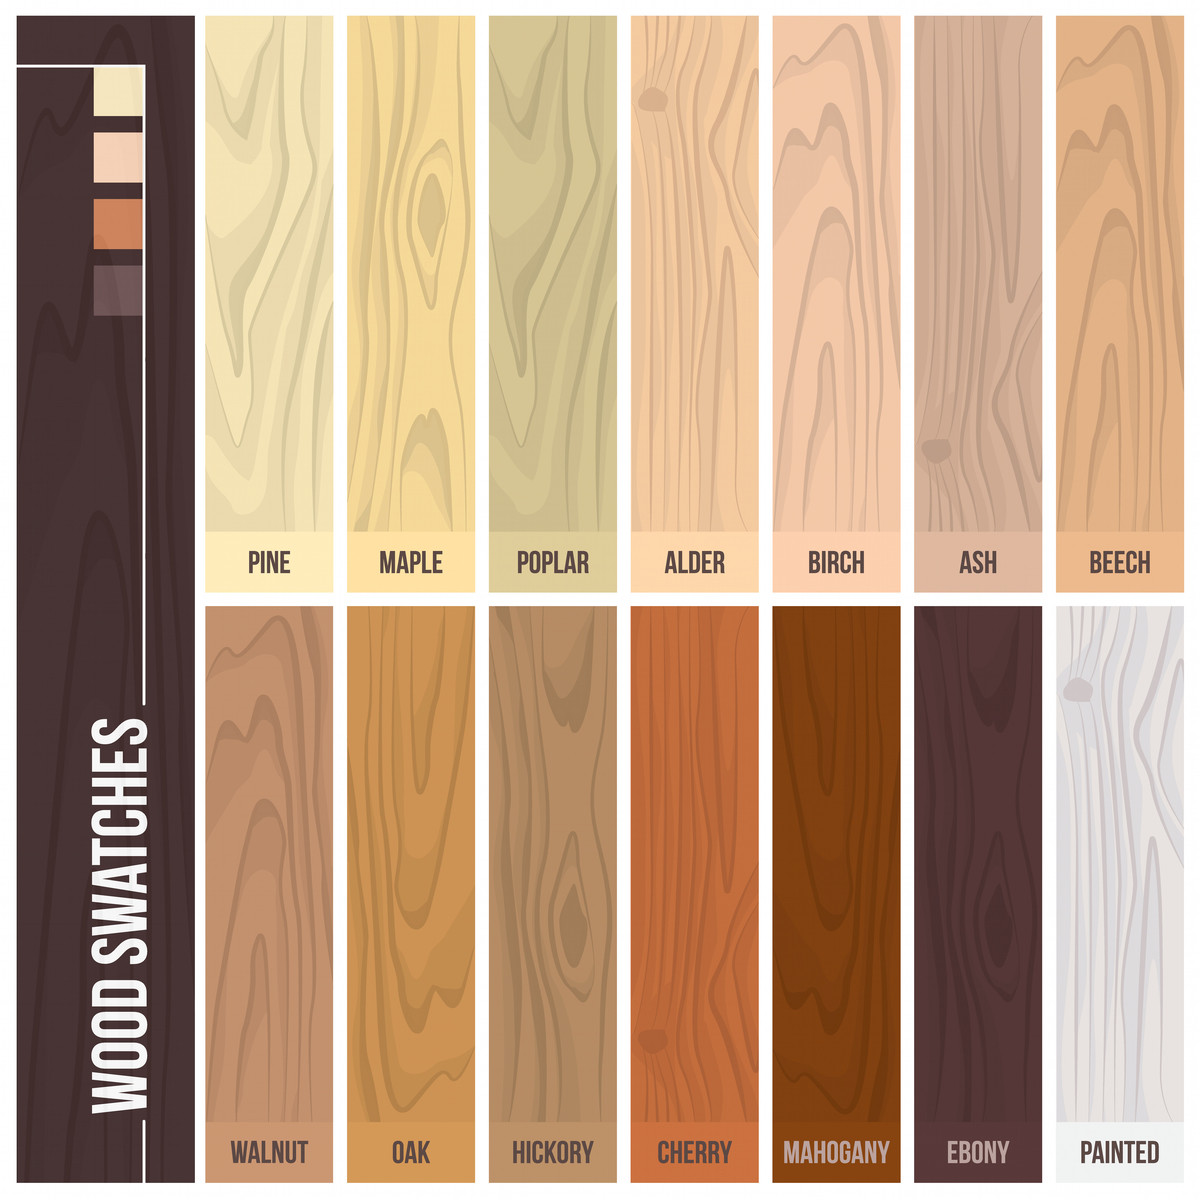 19 Awesome Hardwood Floor Finishing Supplies 2024 free download hardwood floor finishing supplies of 12 types of hardwood flooring species styles edging dimensions intended for types of hardwood flooring illustrated guide